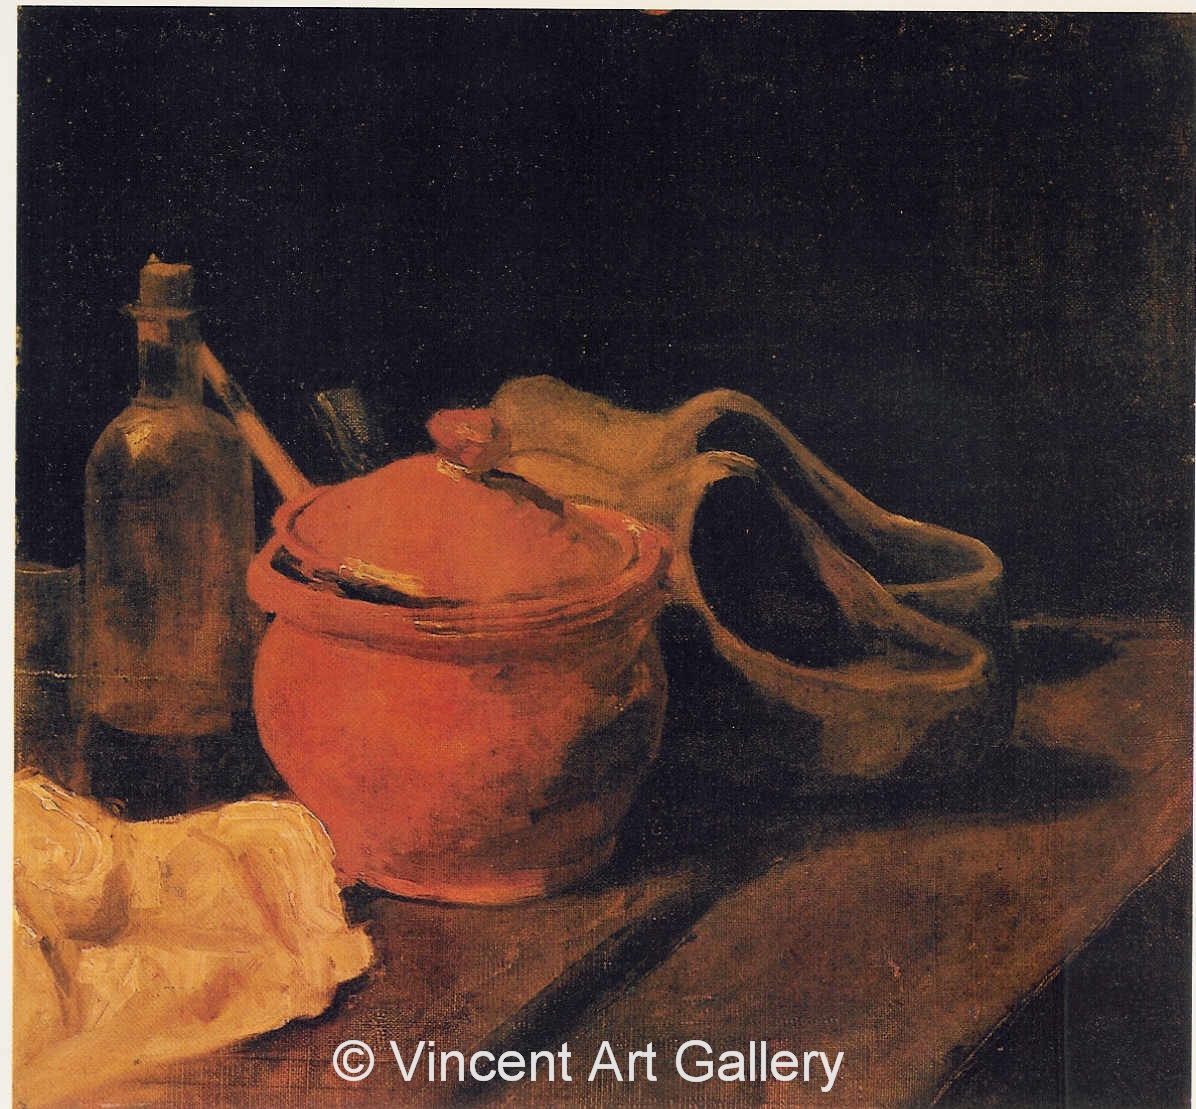 JH 920 - Still Life with Earthenware, Bottle and Clogs